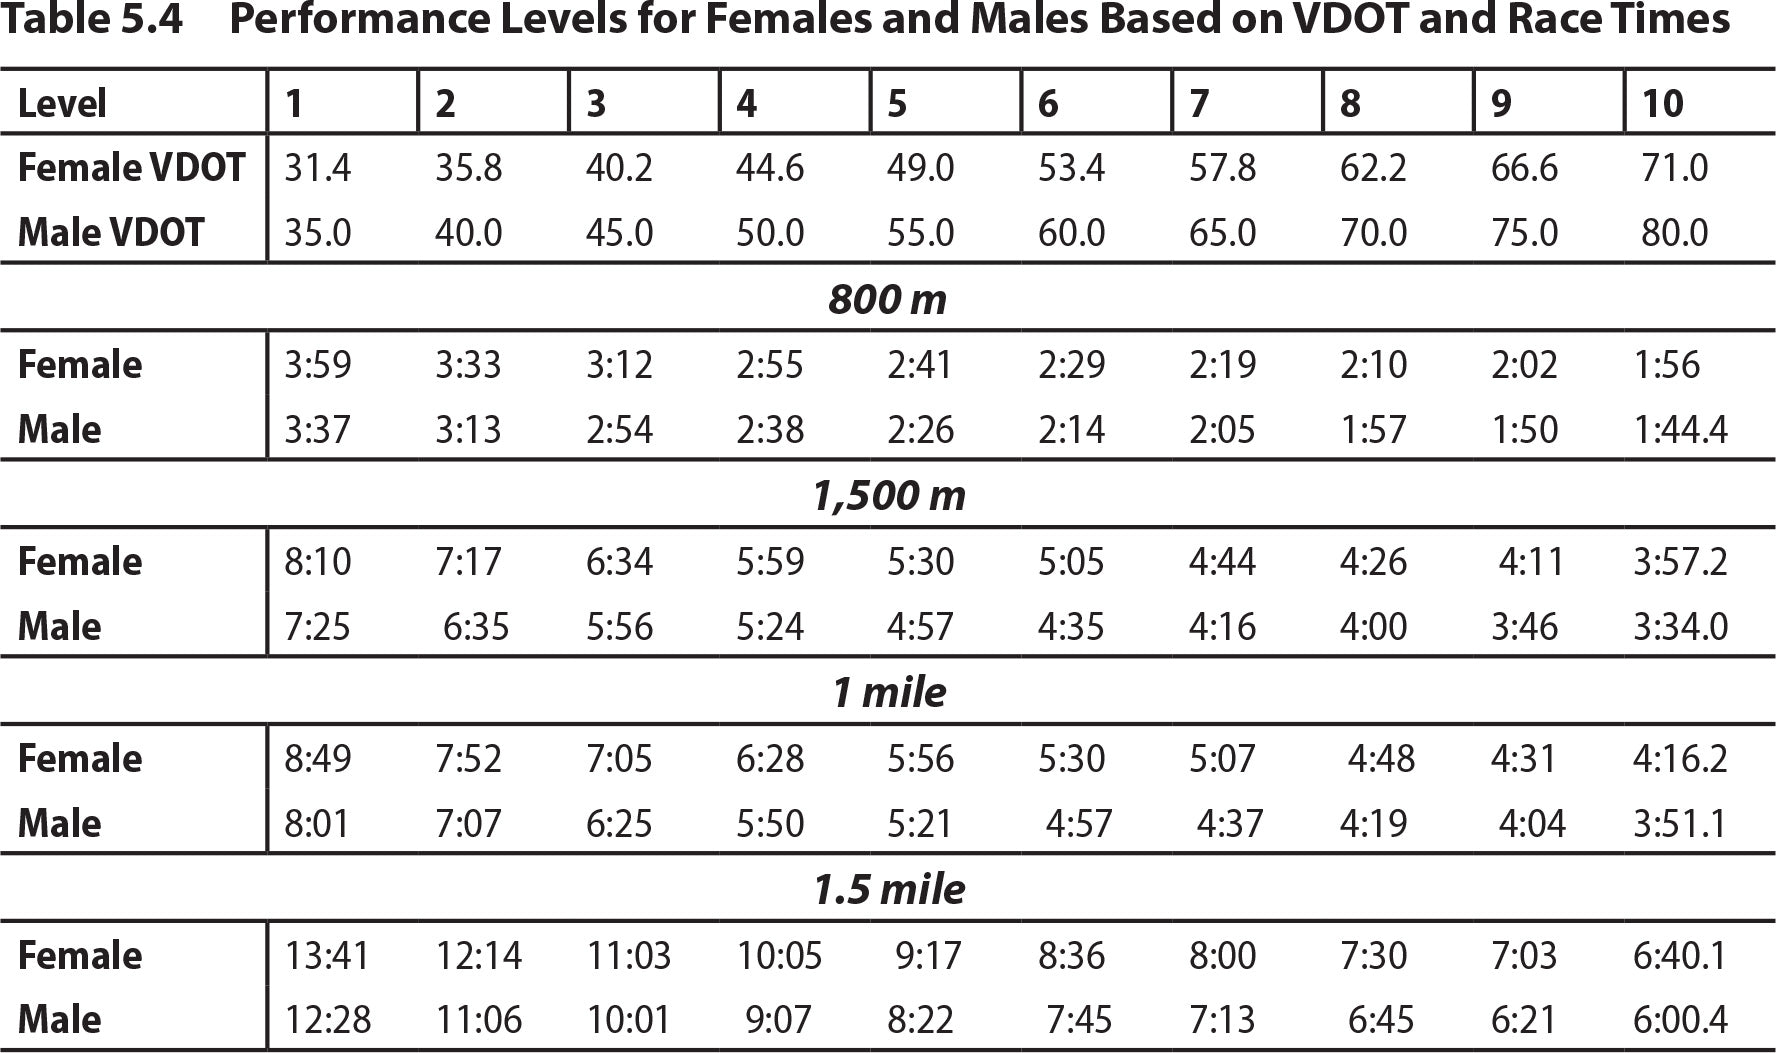 Table 5.4 Performance Levels for Females and Males Based on VDOT and Race Times